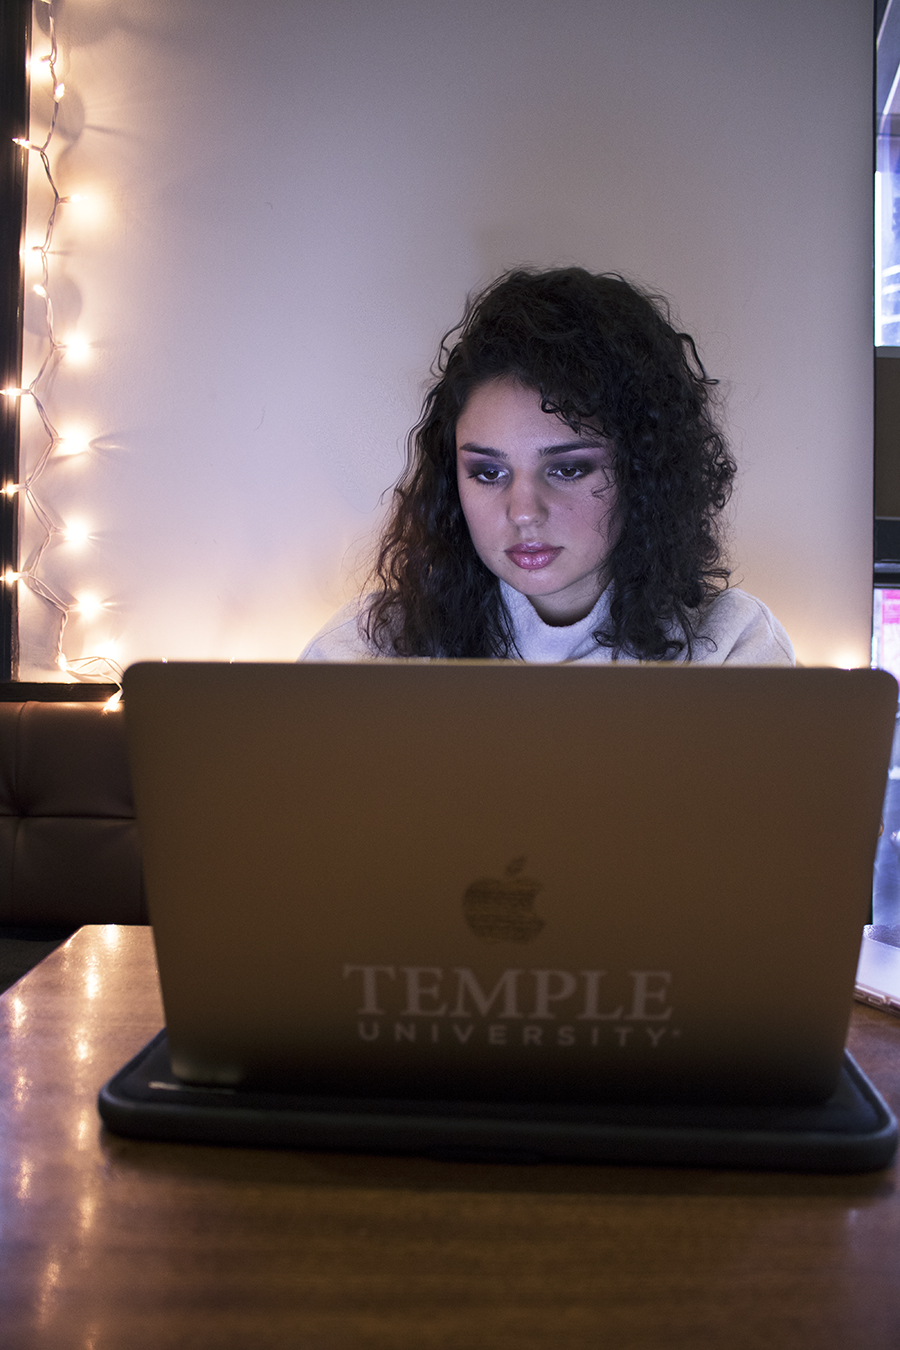 Tyler_Ling_photography_coffeeshop_computers_gazing_absorbed_indoors_stranger_student_Temple_working_frontshot_unaware